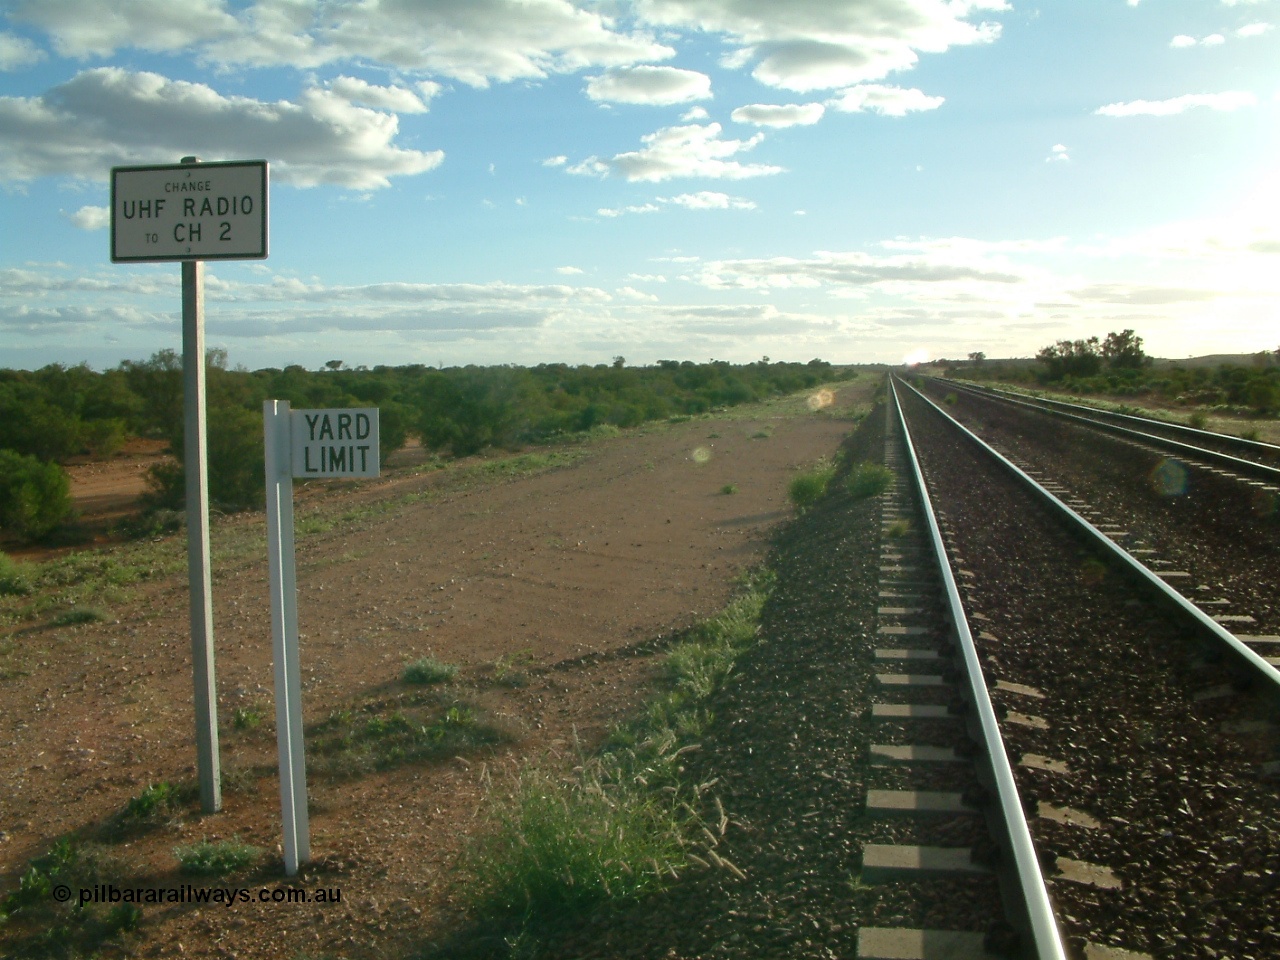 030415 171516
Tarcoola, at the 504.5 km, looking west along the Trans Australian line, Central Australian line on the right at the western yard limit and radio channel change boards. Tarcoola is the junction for the TAR and CAR railways. [url=https://goo.gl/maps/HiaY1eD55ojKxzvt6]GeoData location[/url]. 15th April 2003.
